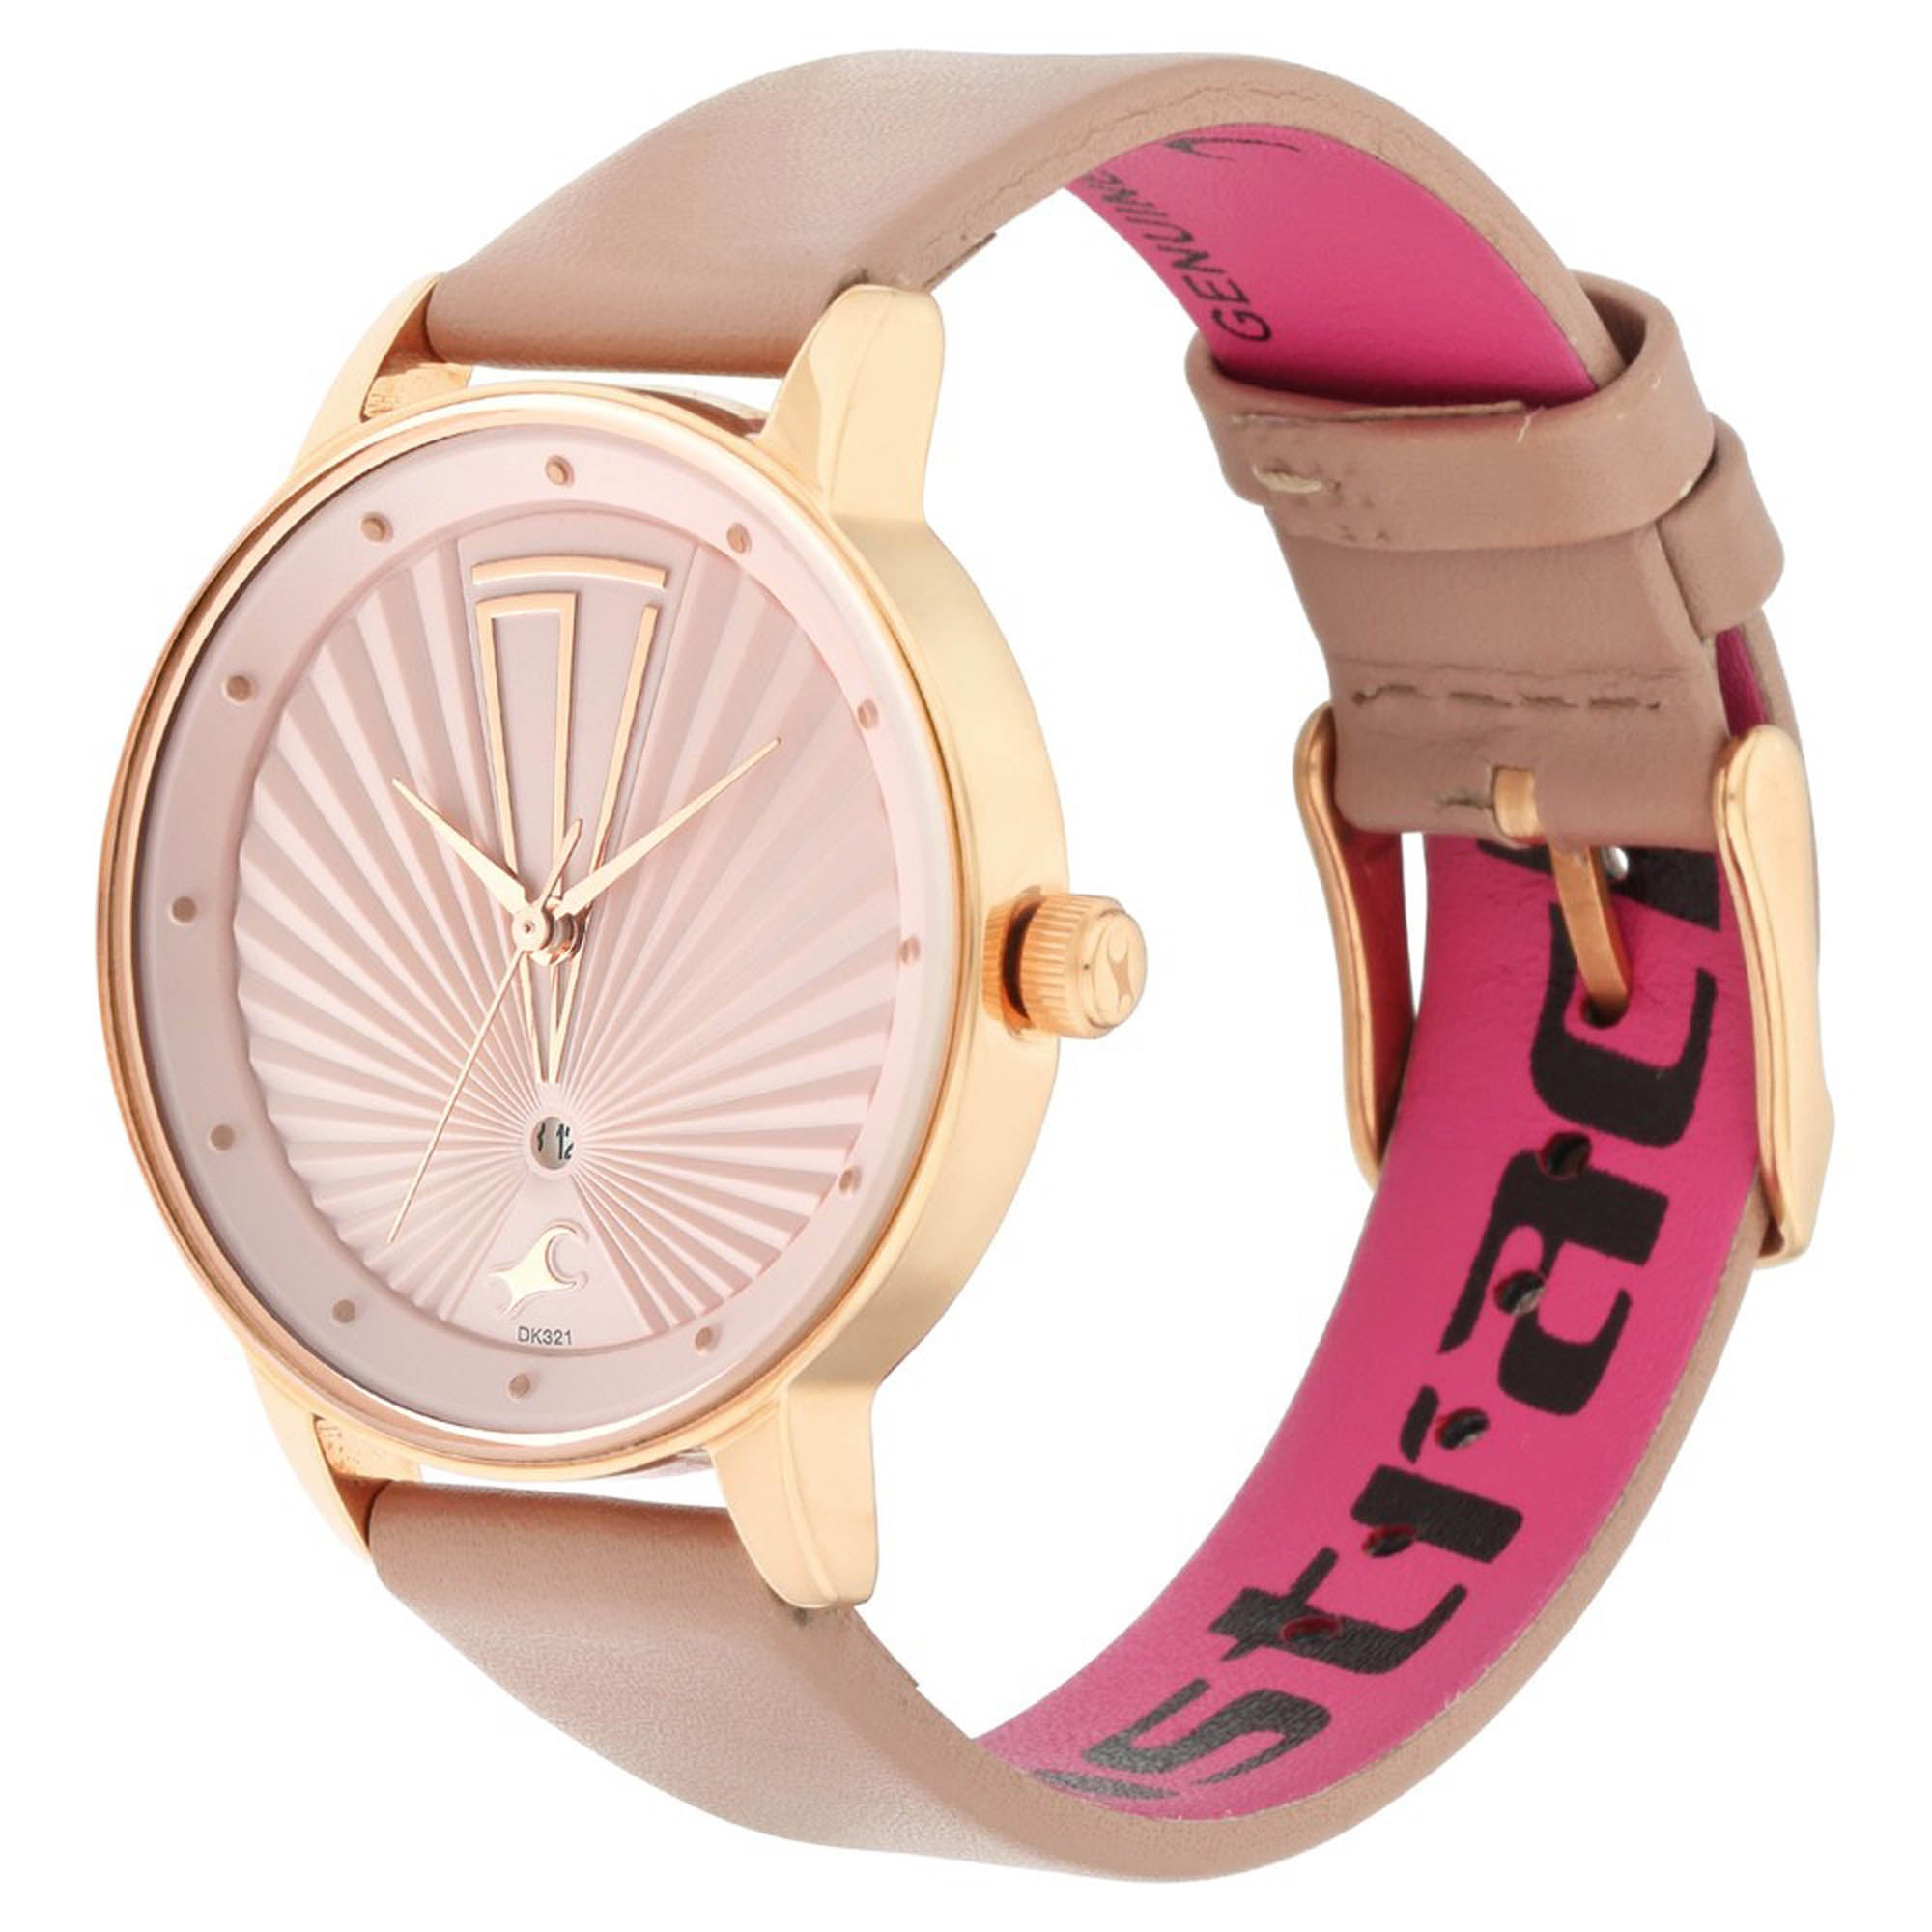 Fastrack Fastrack Ruffles Quartz Analog with Date Pink Dial Leather Strap Watch for Girls